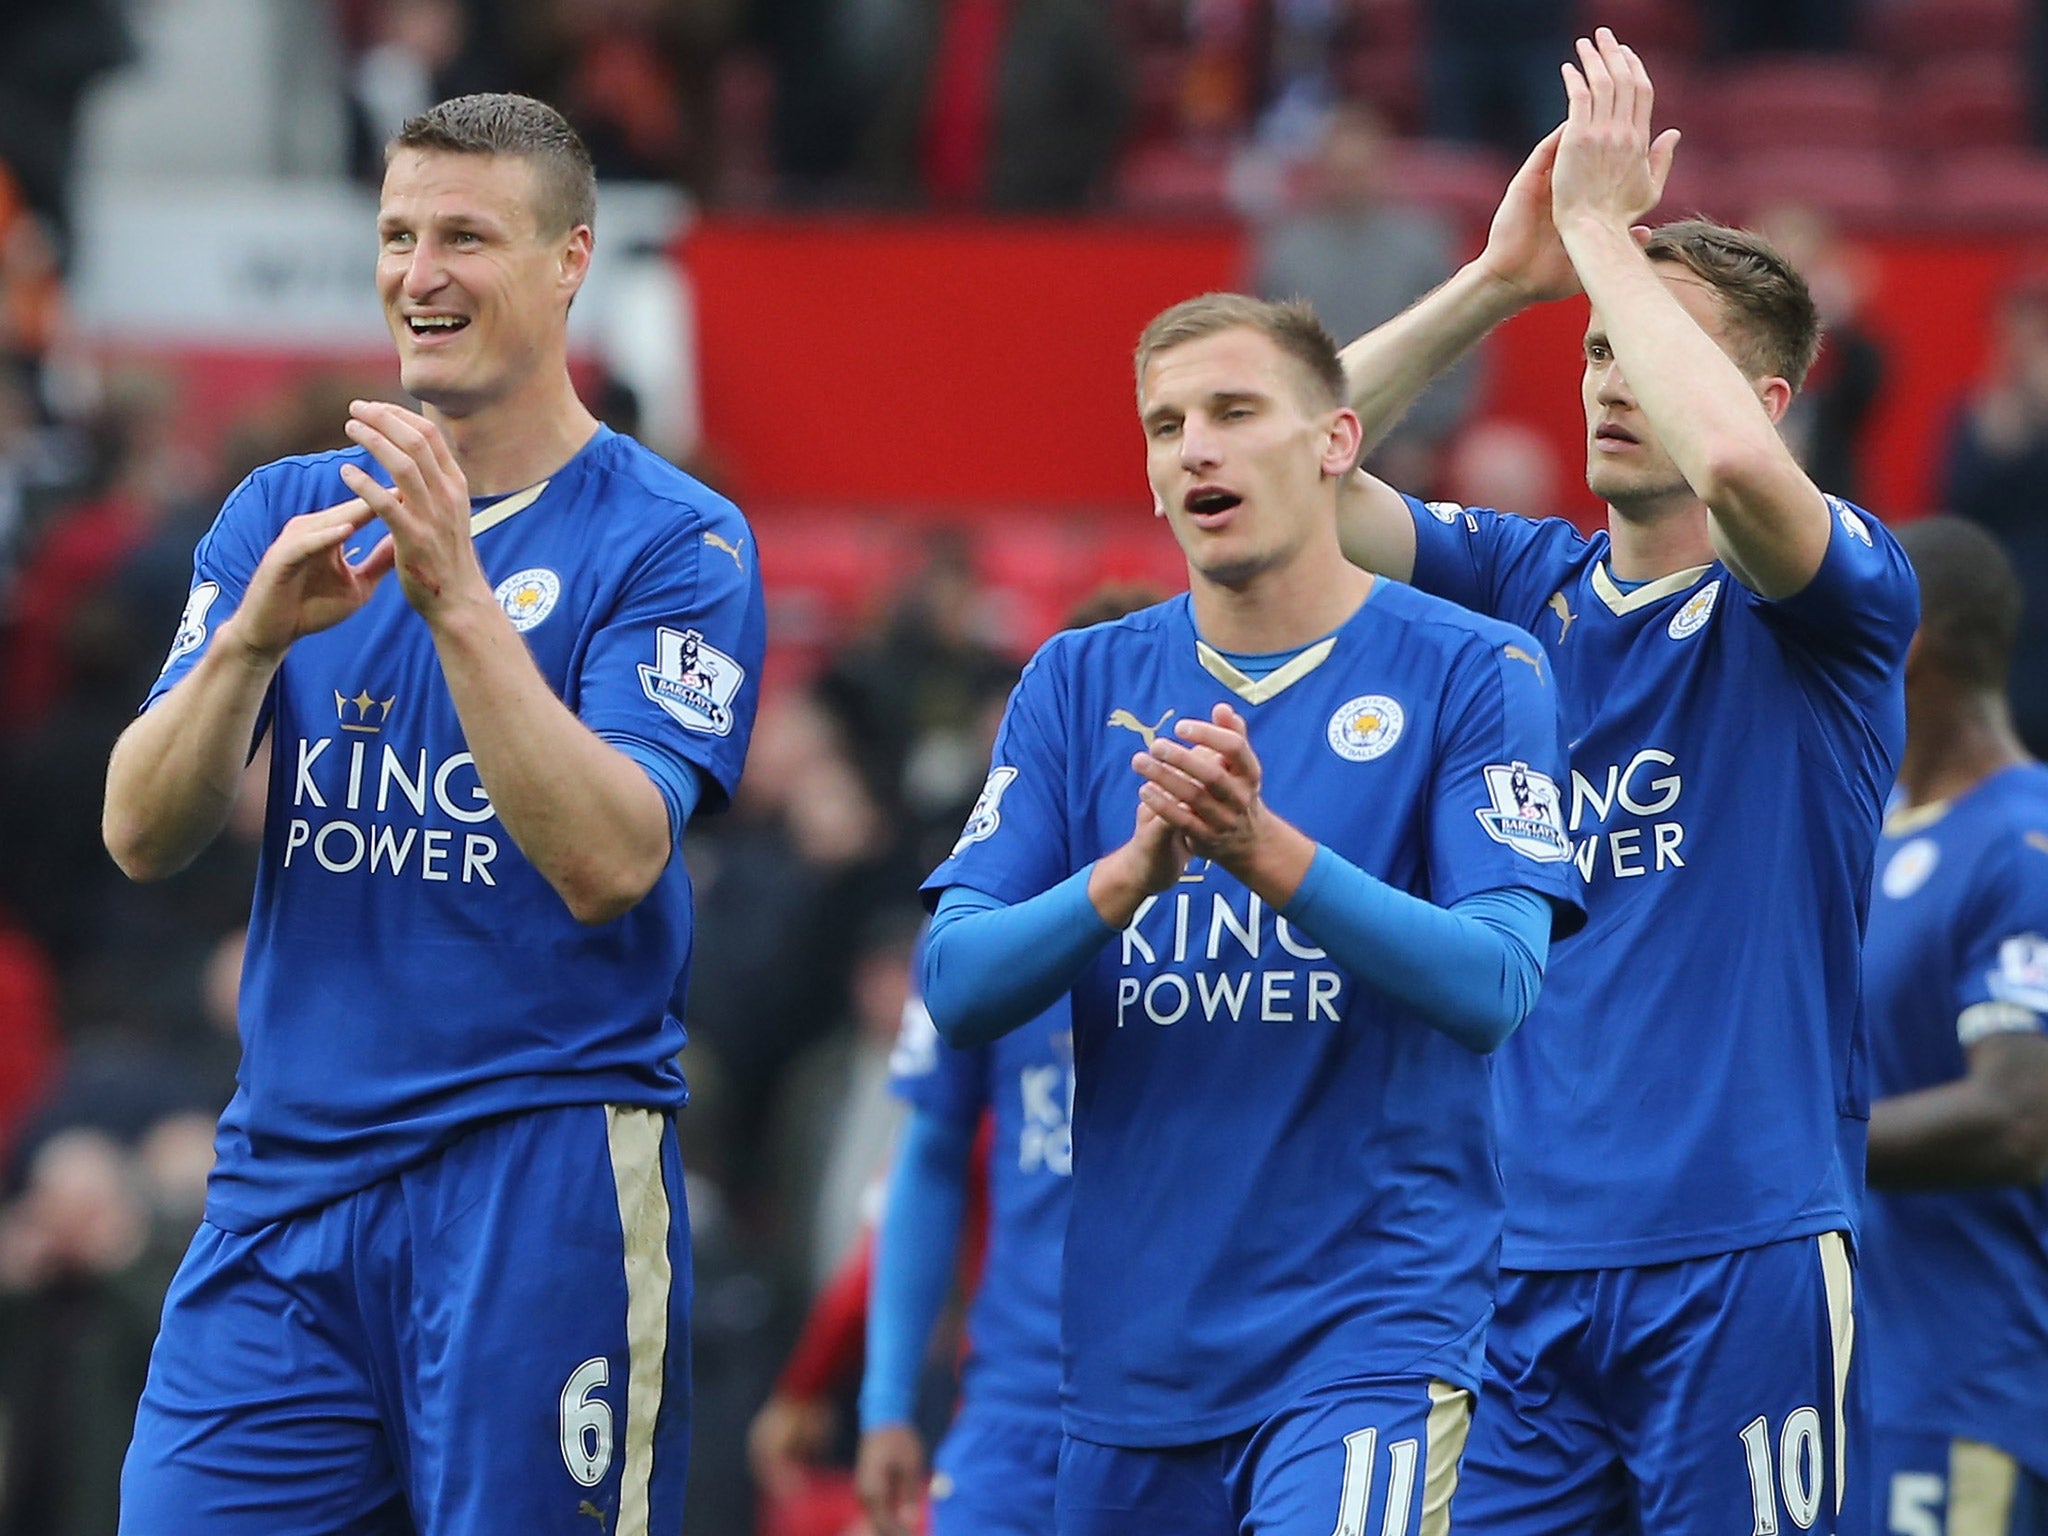 Mark Albrighton has revealed that the Leicester squad will watch Chelsea vs Tottenham together